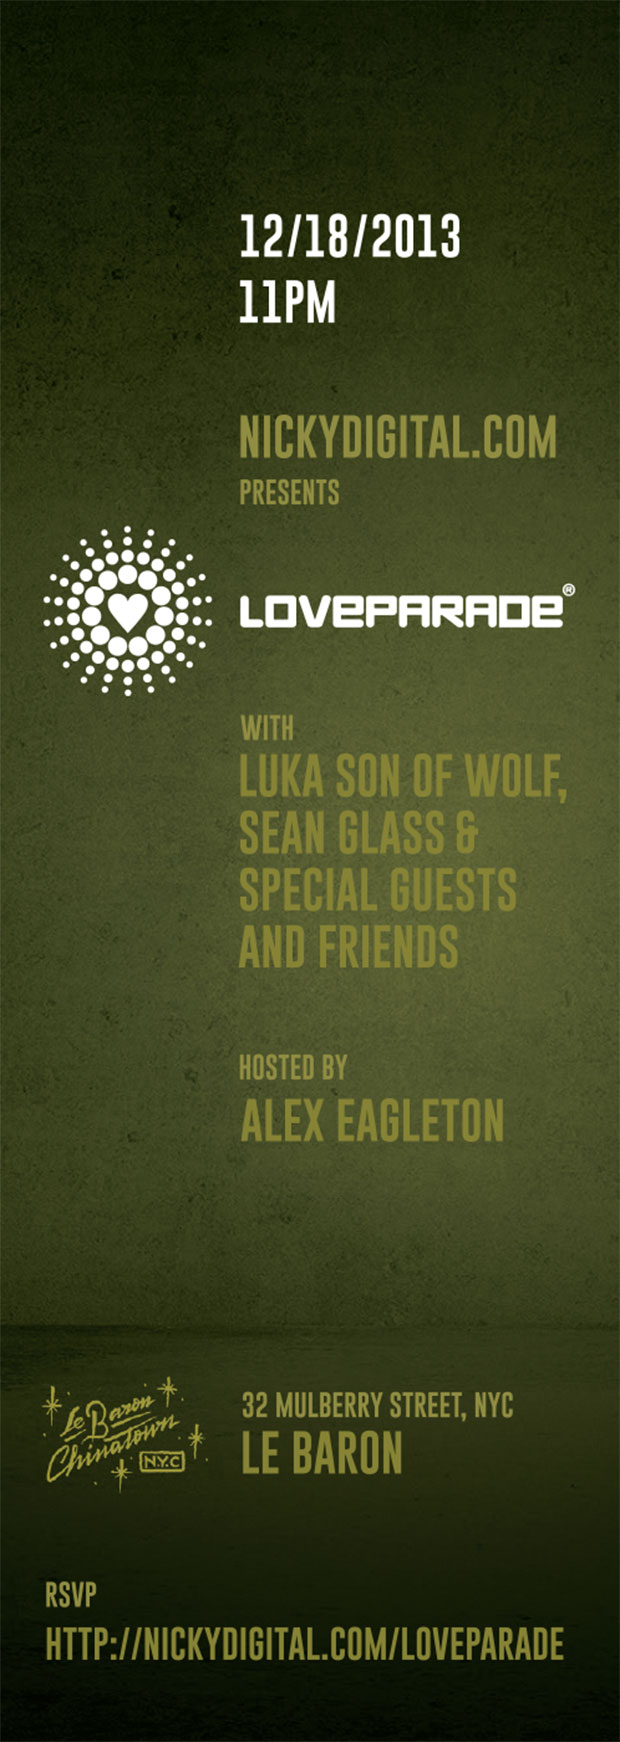 PAST EVENT: Love Parade US Party at Le Baron on December 18, 2013! RSVP for FREE entry!